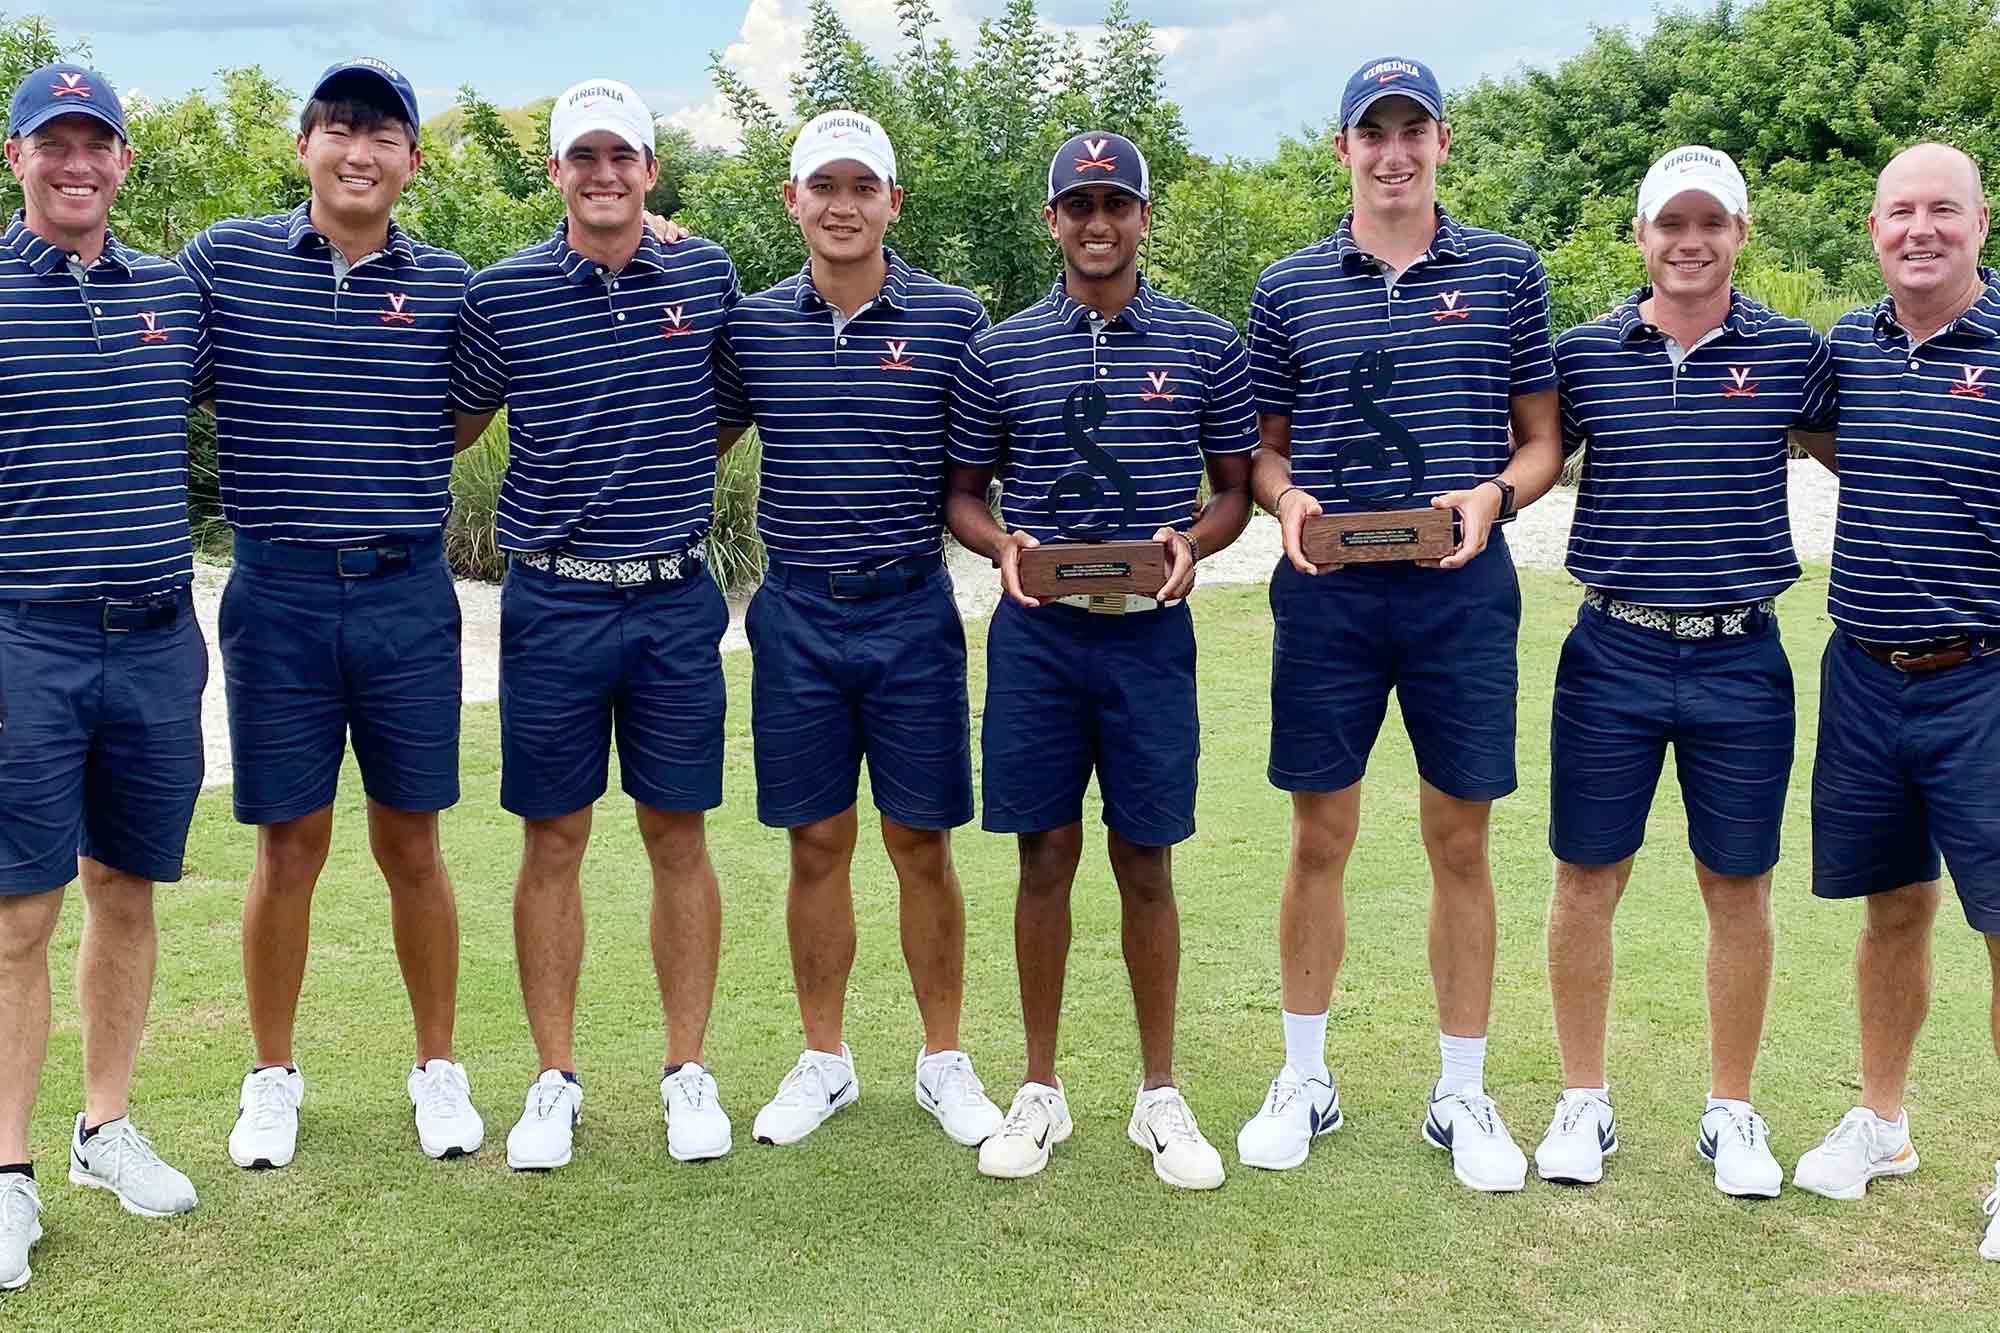 News UVA Men’s Golf Makes History By Ascending to No. 1 Ranking The